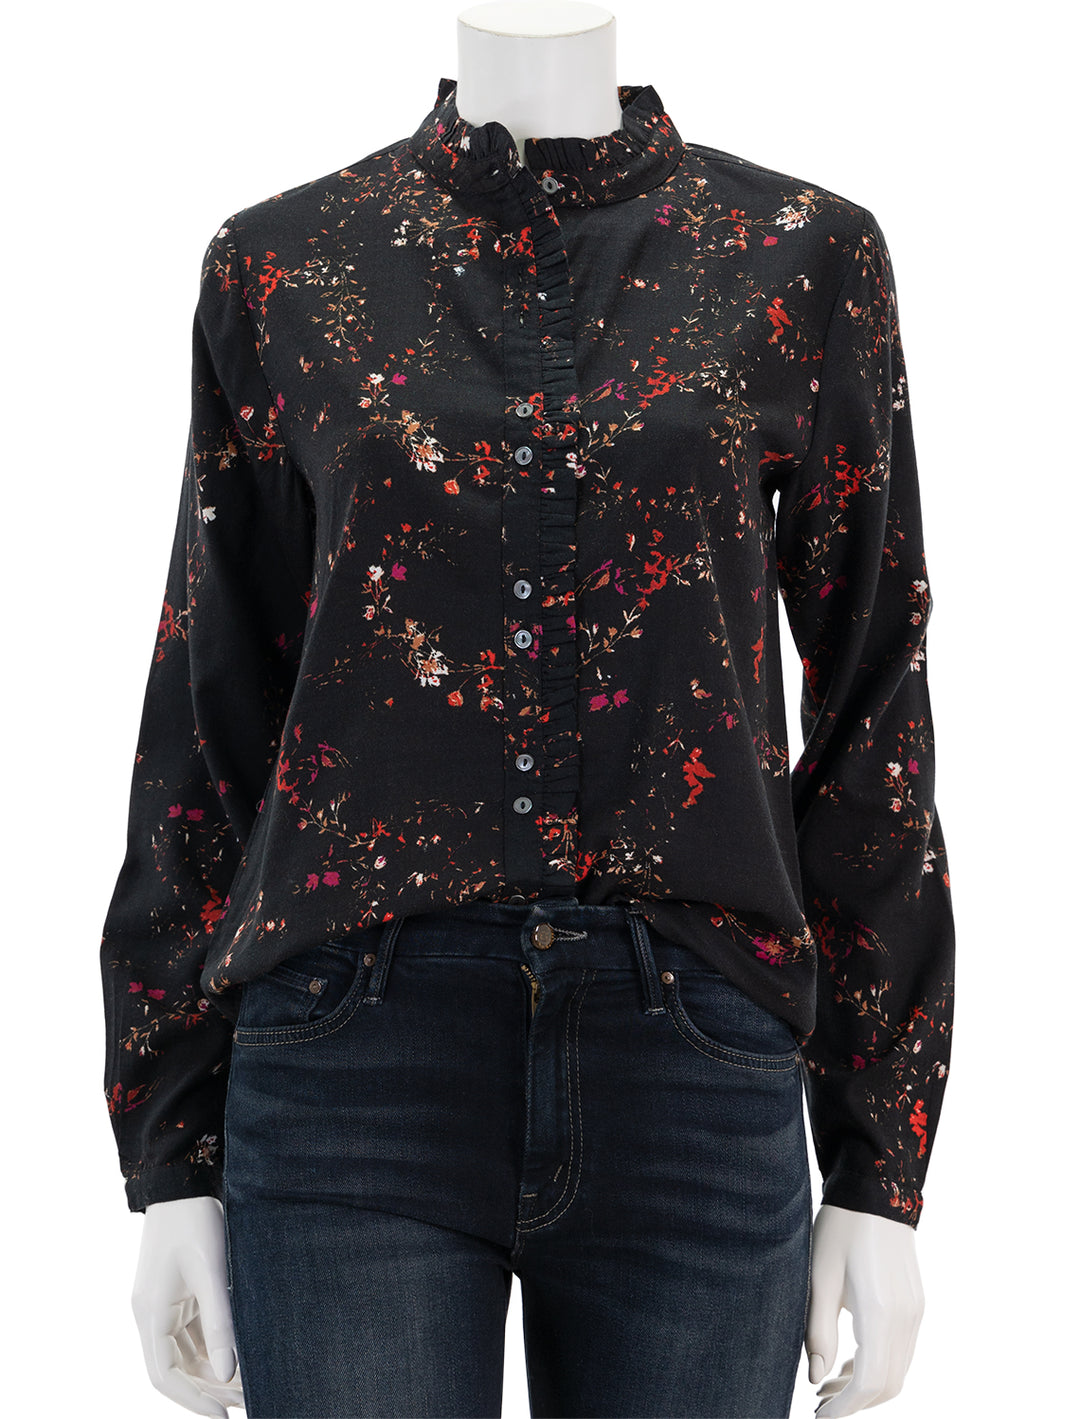 Front view of Lilla P.'s ruffle button down blouse in black floral print.